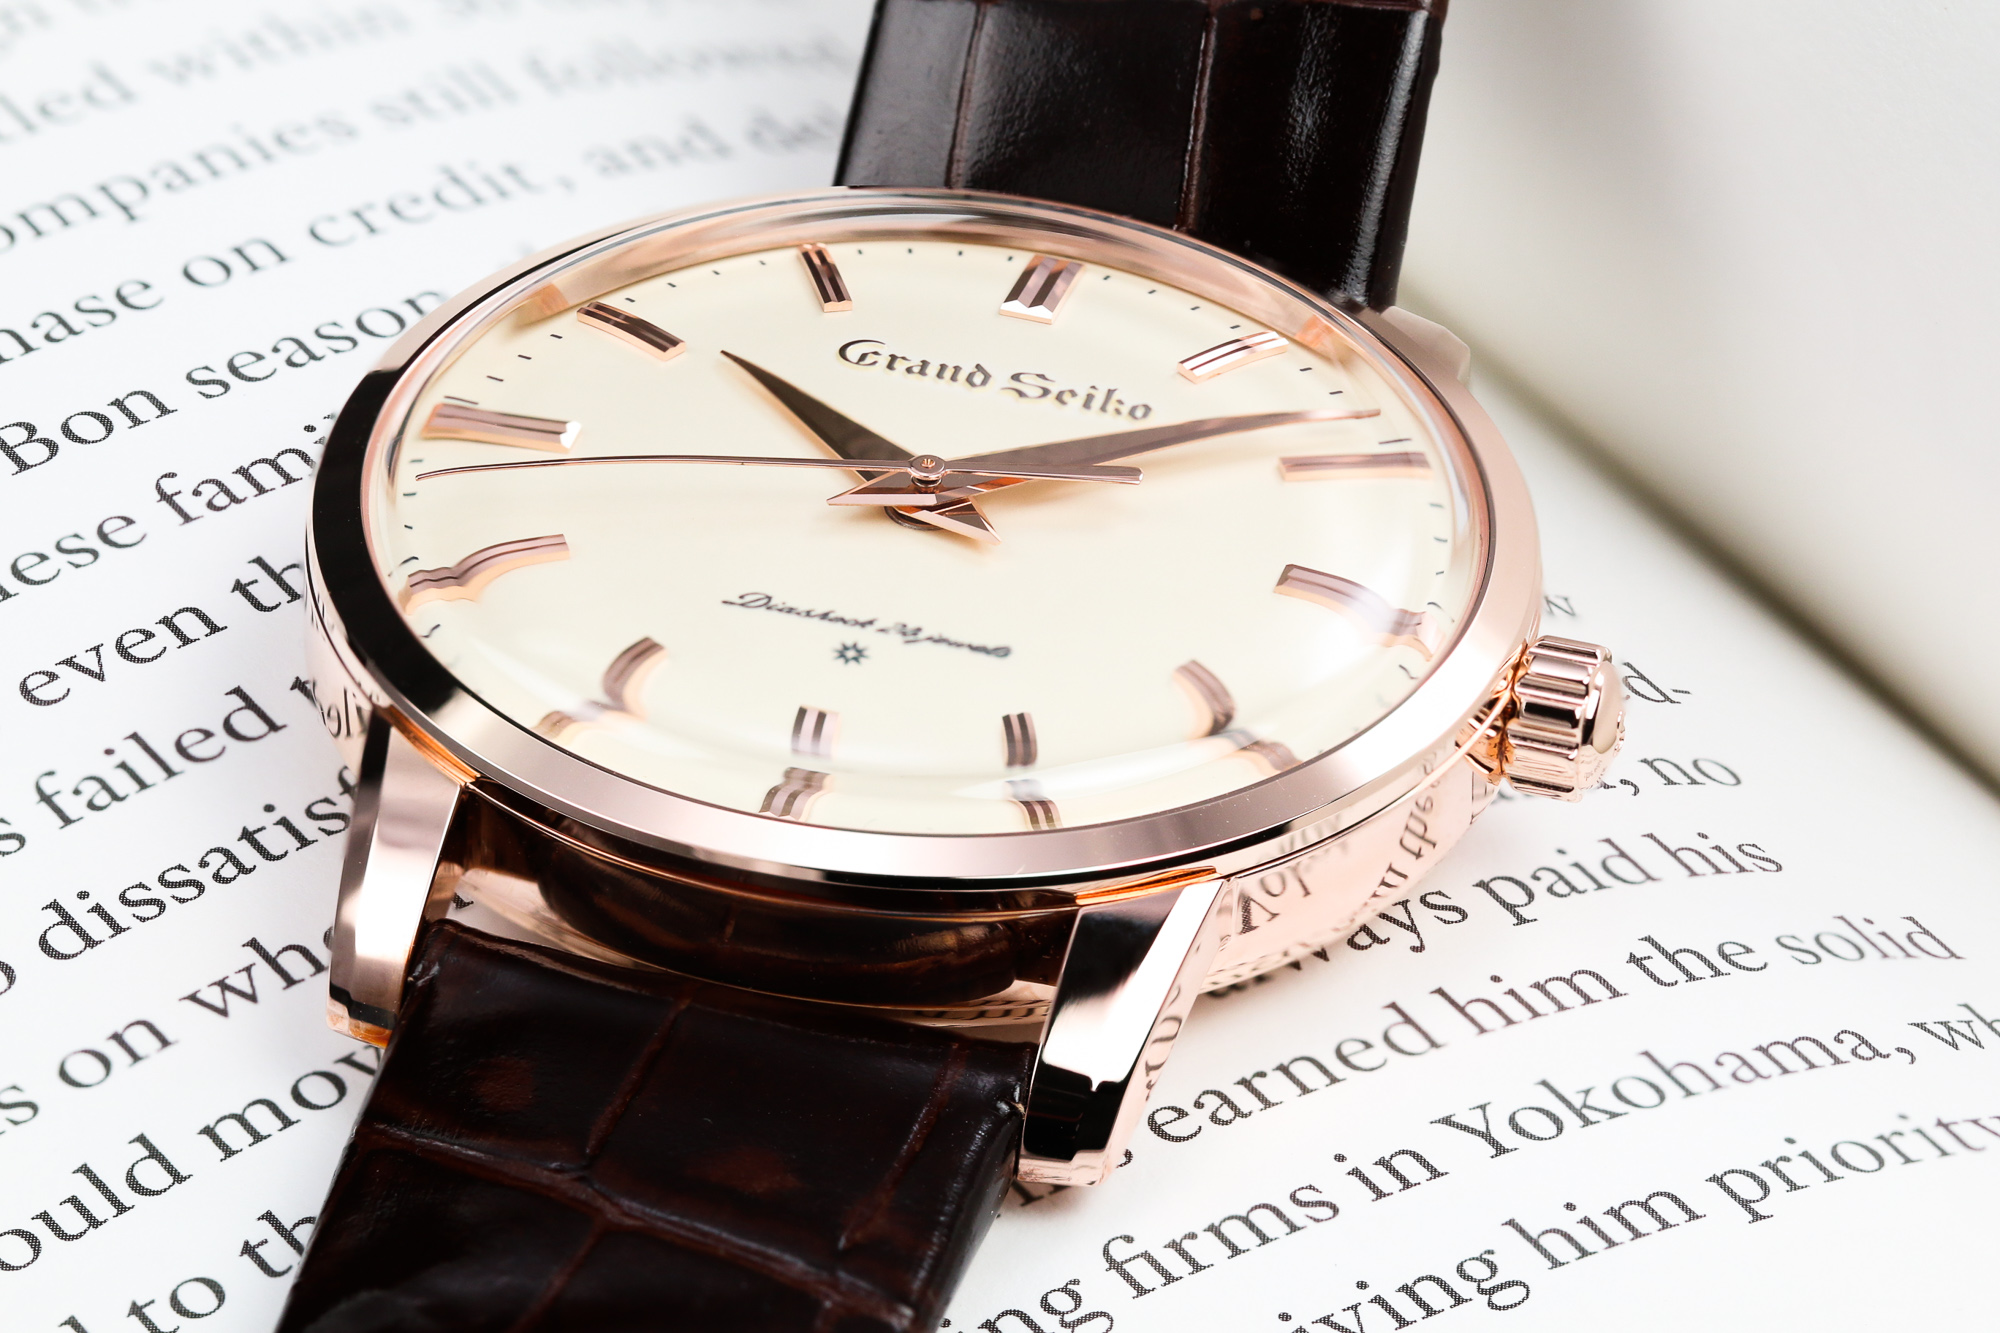 Grand Seiko SBGW260 light dial and gold case on a book.